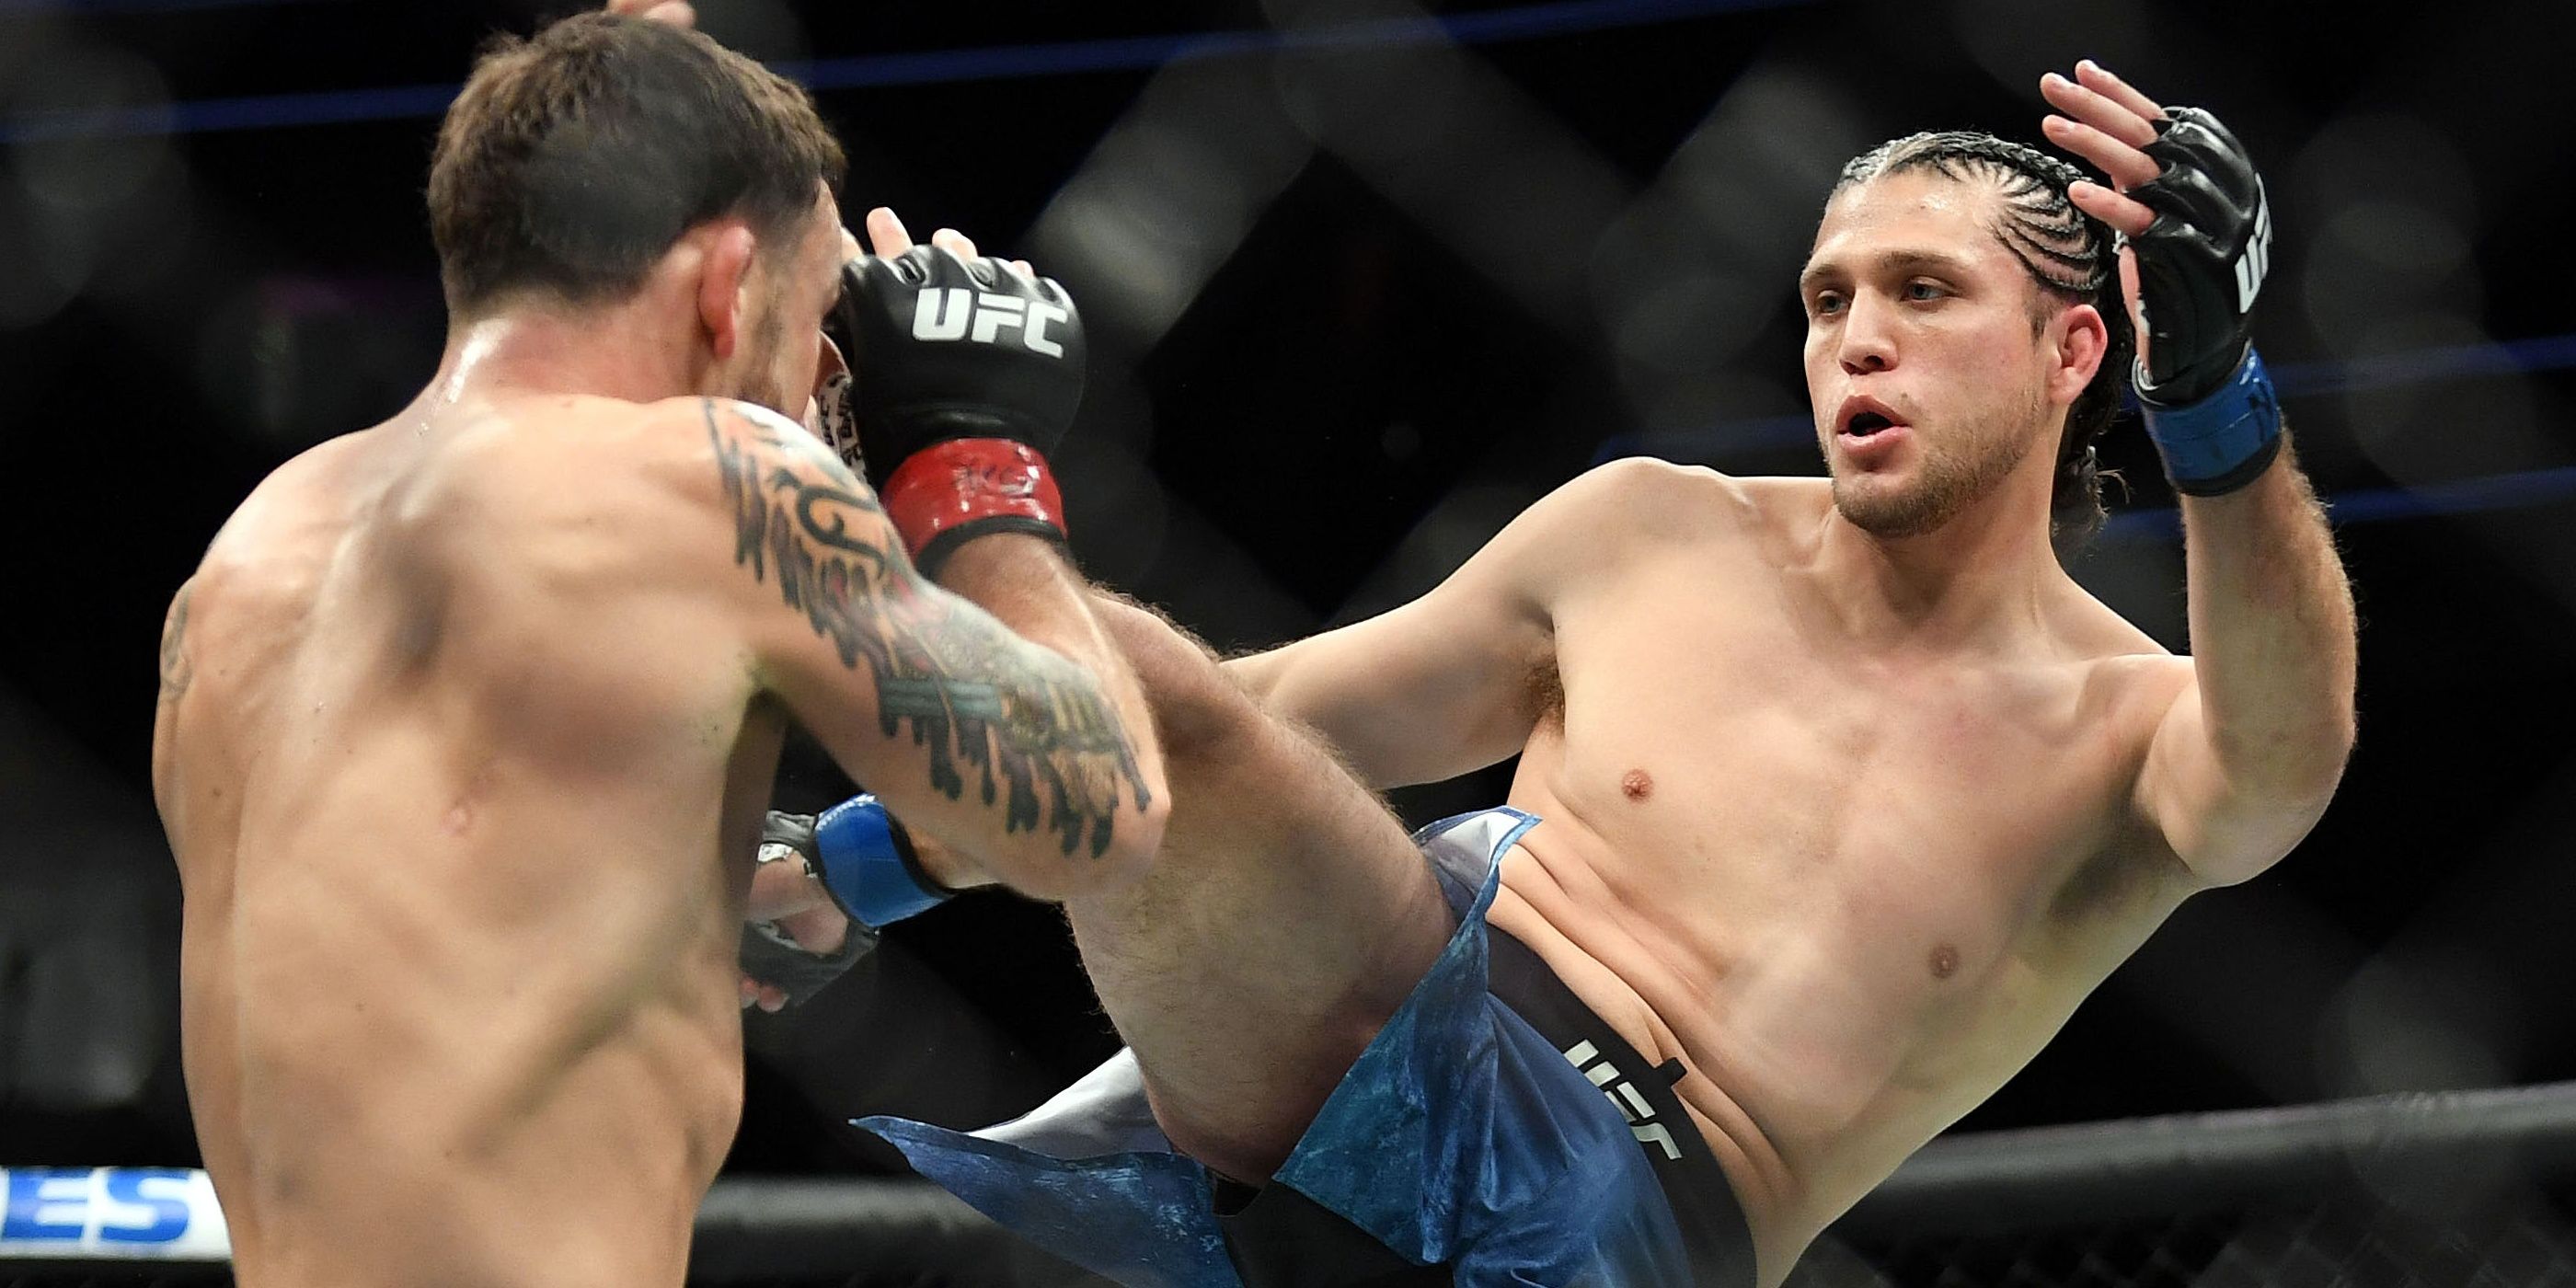 Brian Ortega throws a kick in the UFC cage